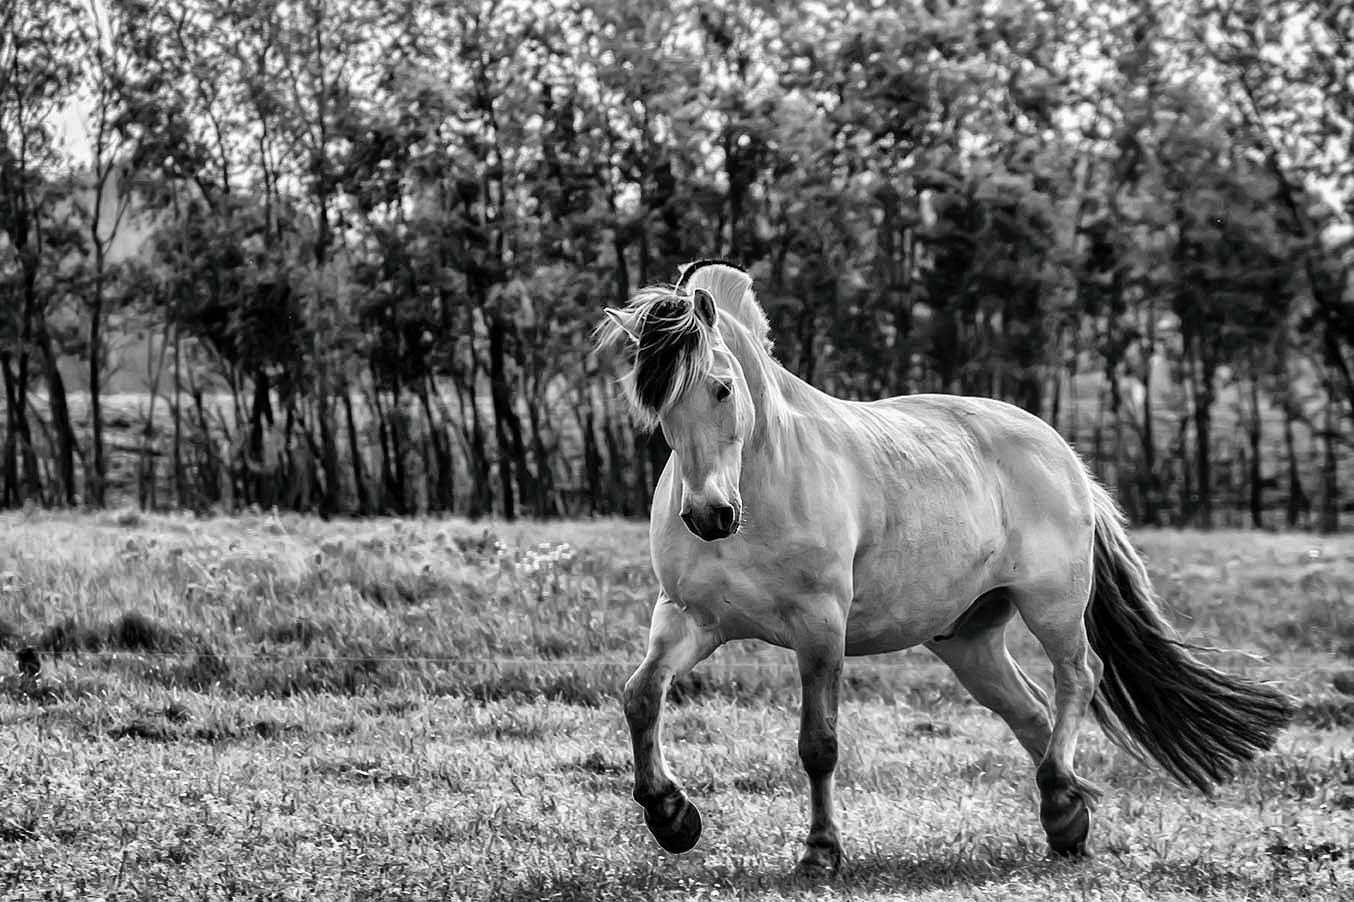 Sony SLT-A77 + DT 18-270mm F3.5-6.3 sample photo. My horse bink photography